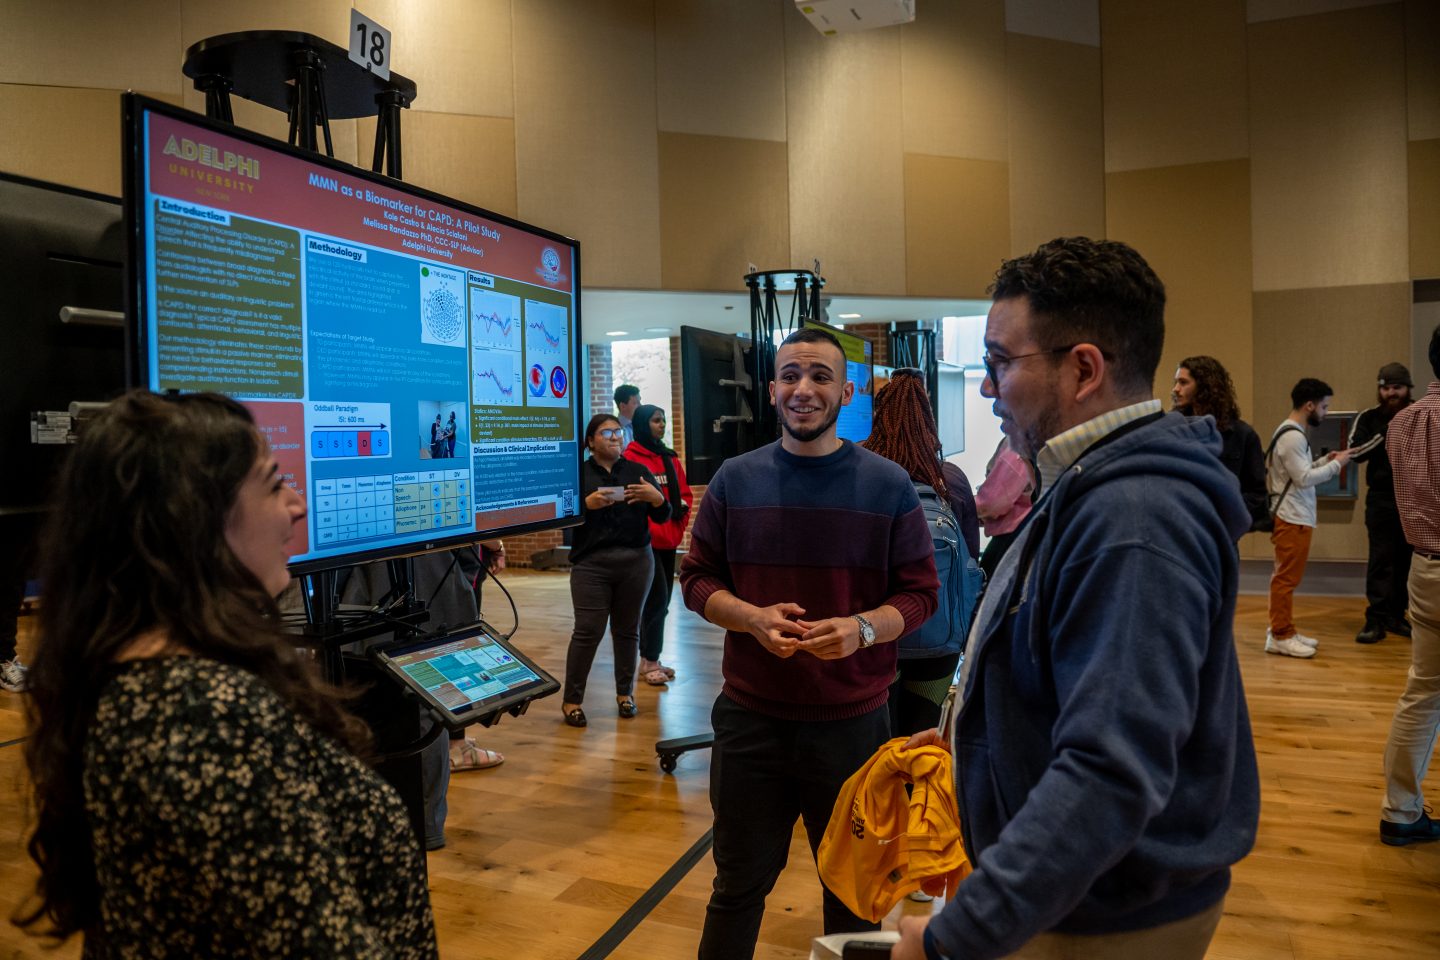 Three Adelphi students standing by an e-poster discuss a 2023 Research Day presentation on biomarkers in the University Center.